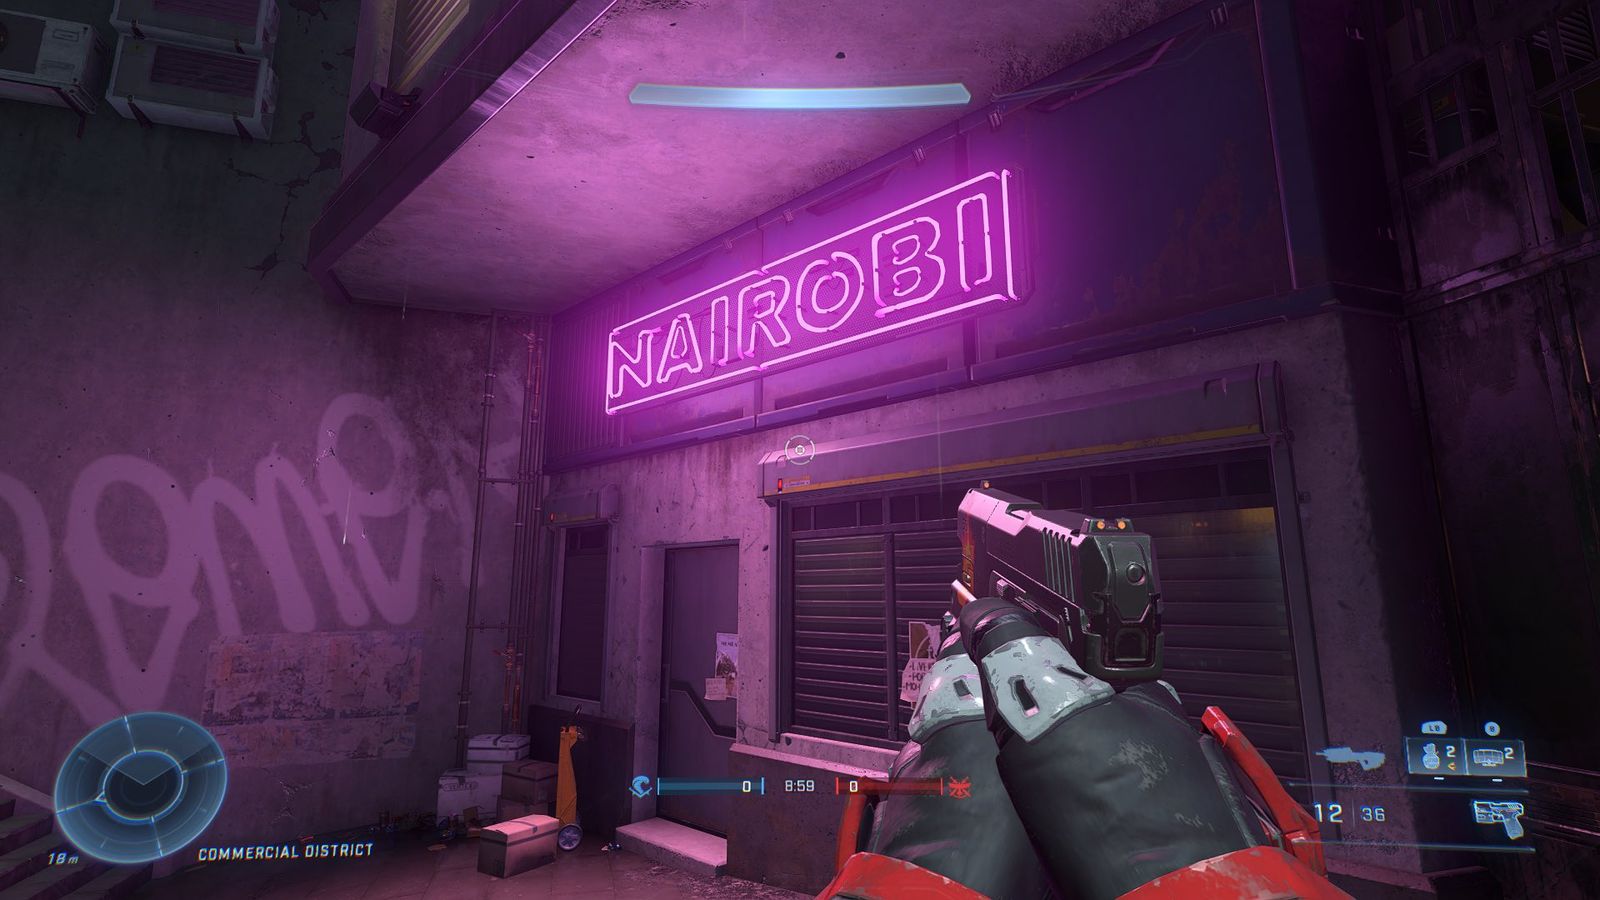 An image of the Halo Infinite Streets map's Commercial District, with a "Nairobi" purple neon sign.